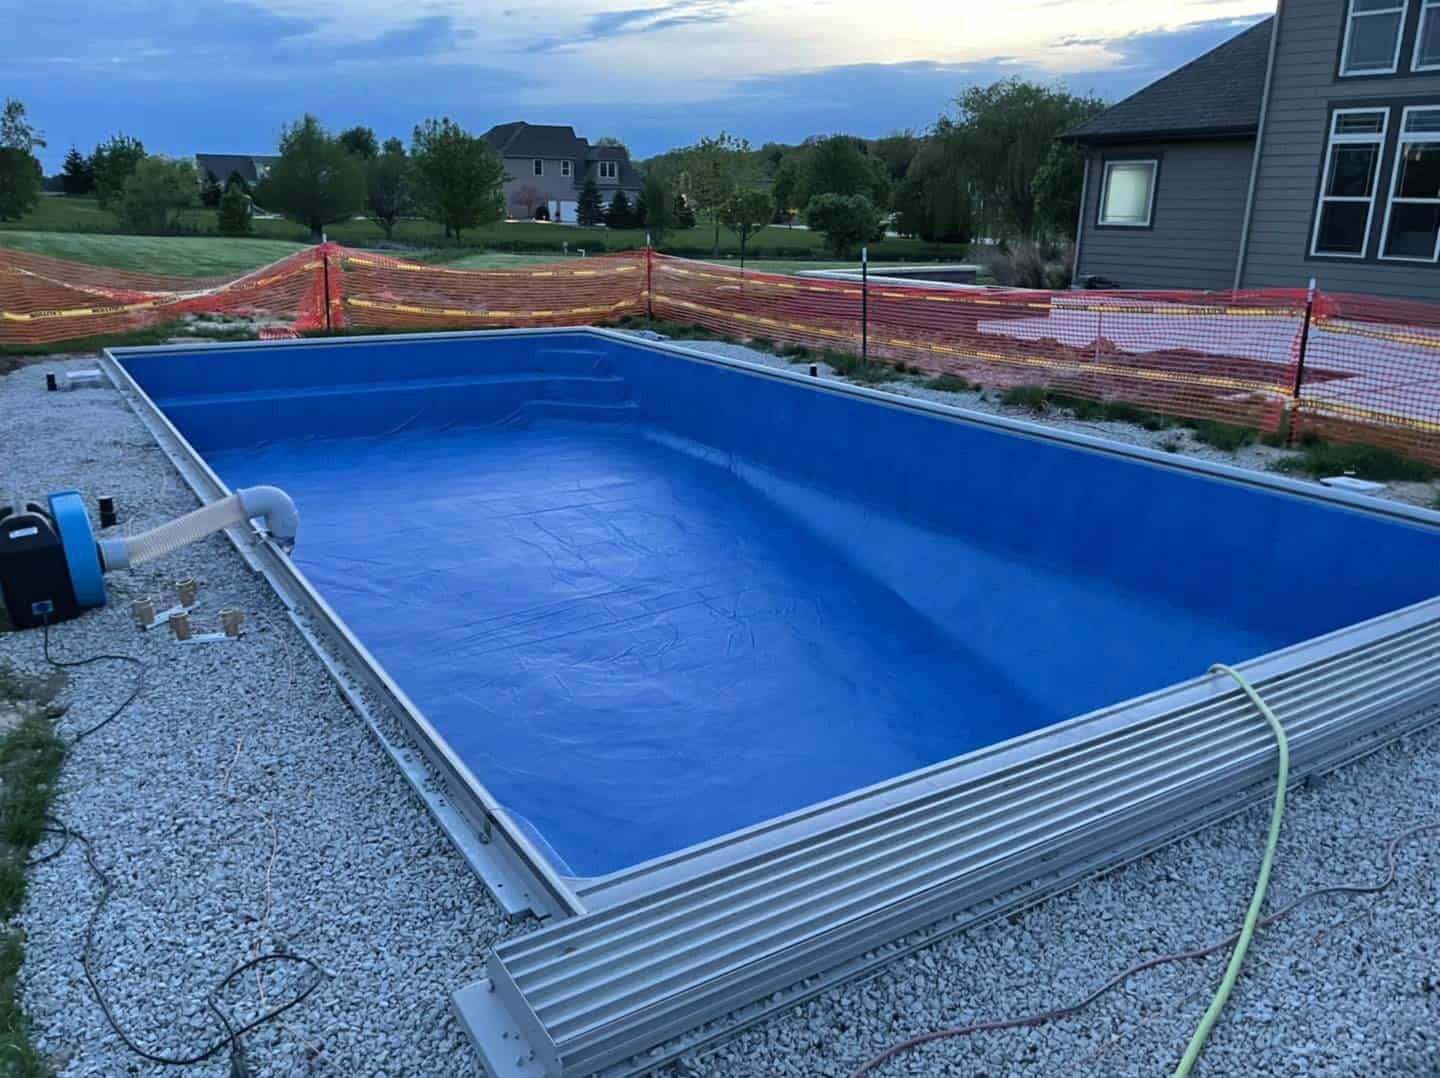 A blue swimming pool being installed in a backyard.